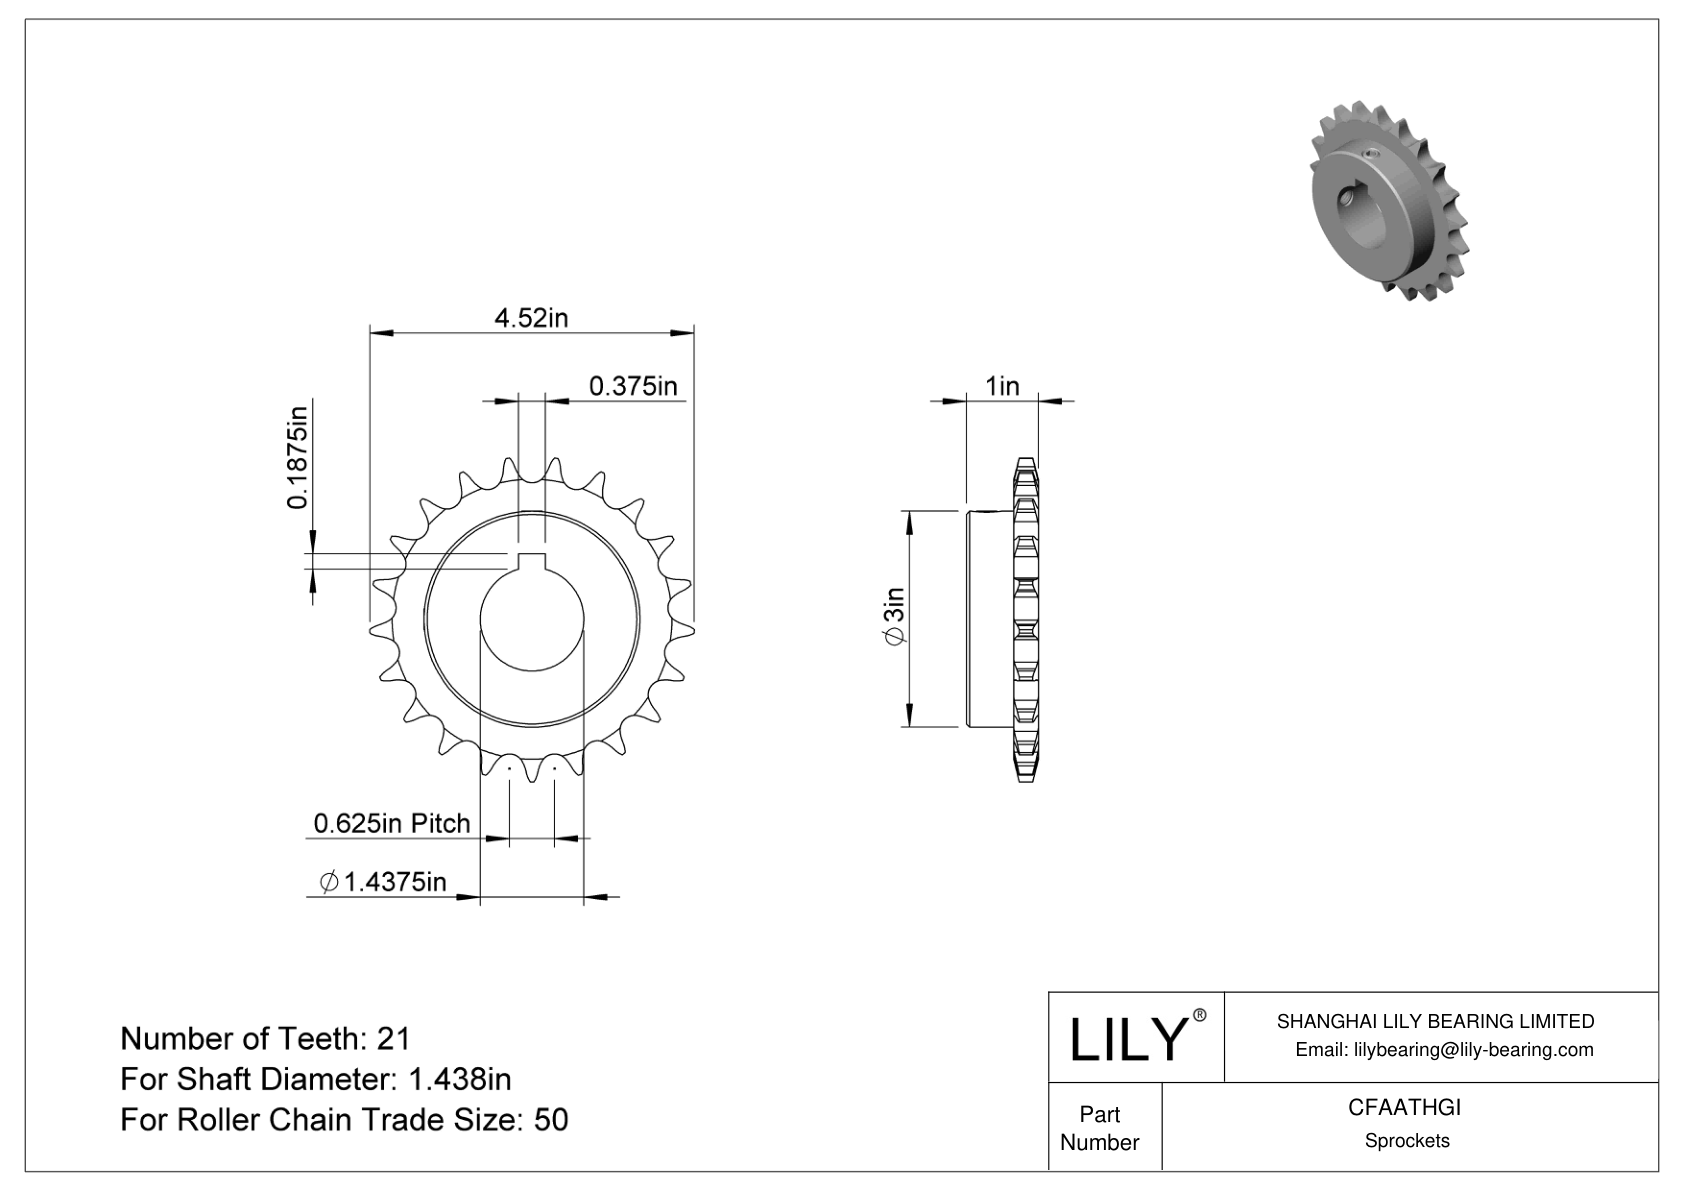 CFAATHGI Wear-Resistant Sprockets for ANSI Roller Chain cad drawing